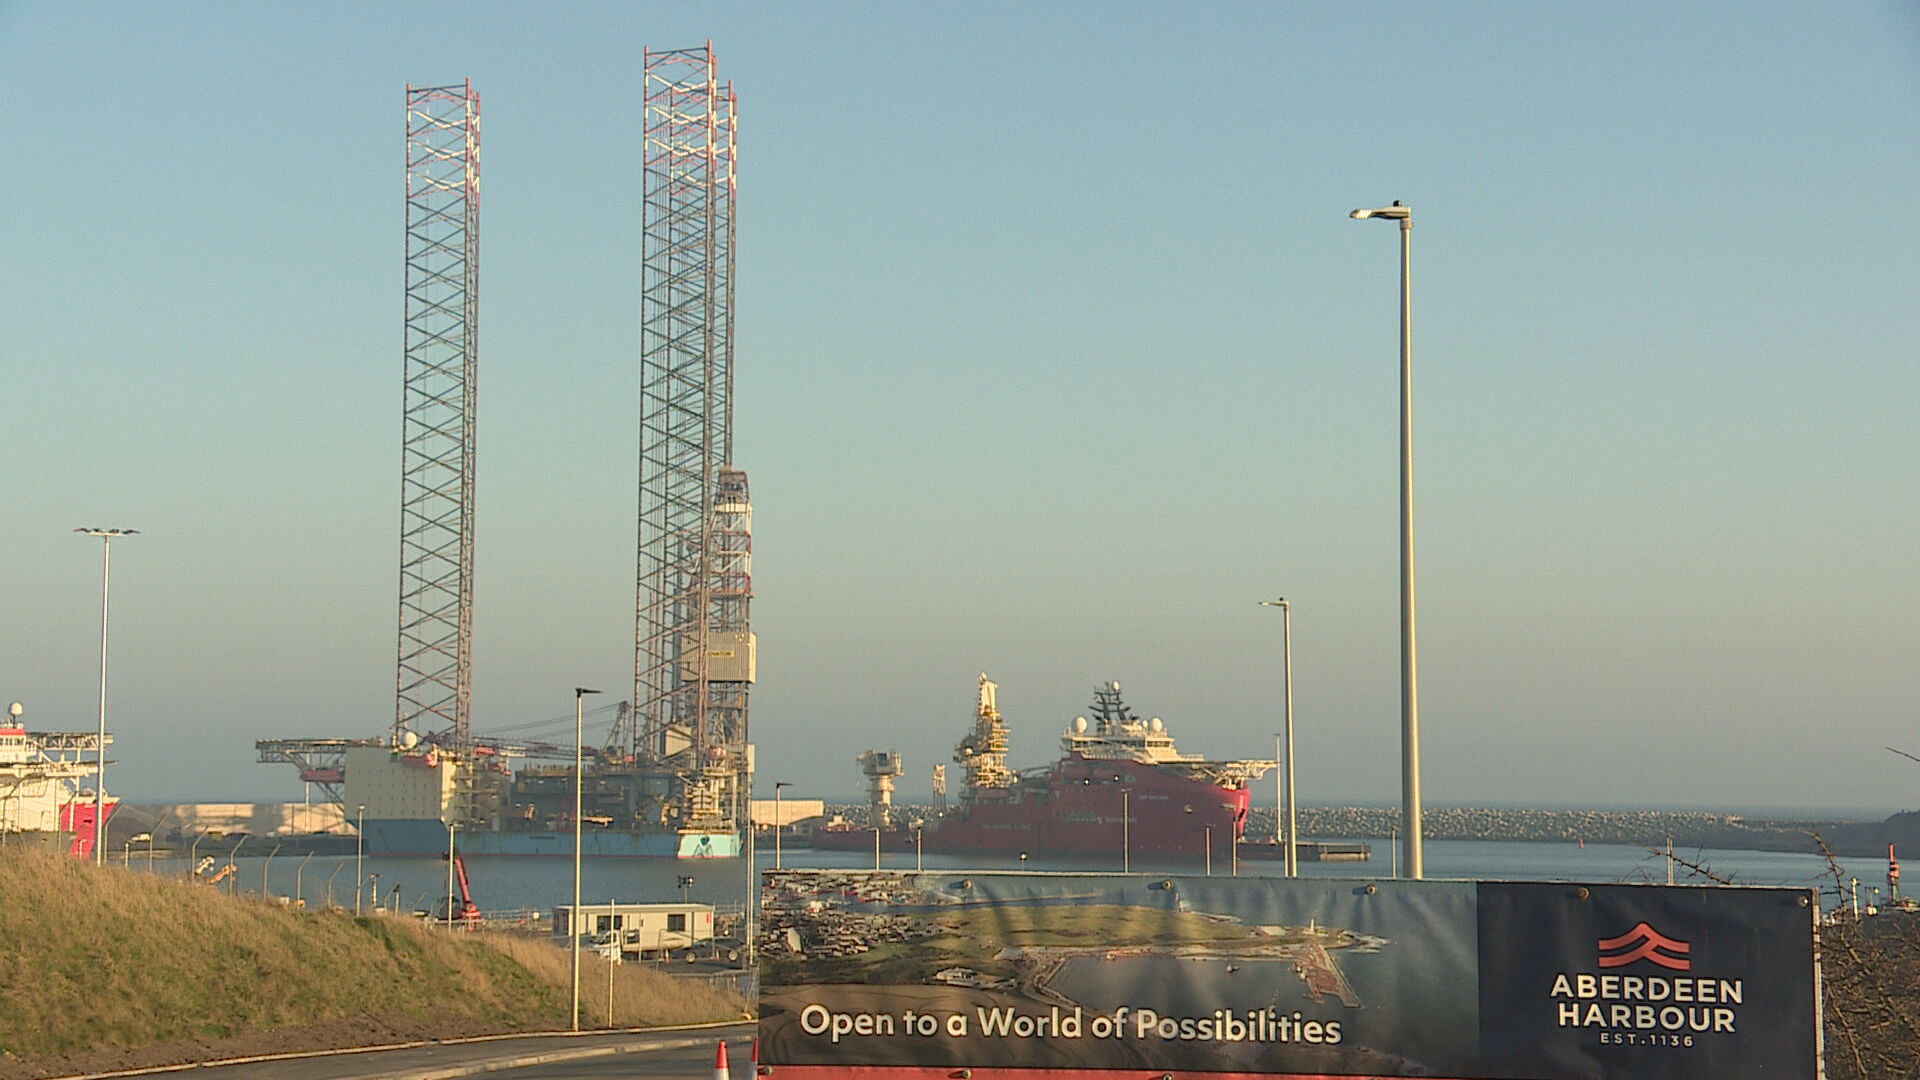 The Noble Innovator is the tallest vessel to ever berth in Aberdeen